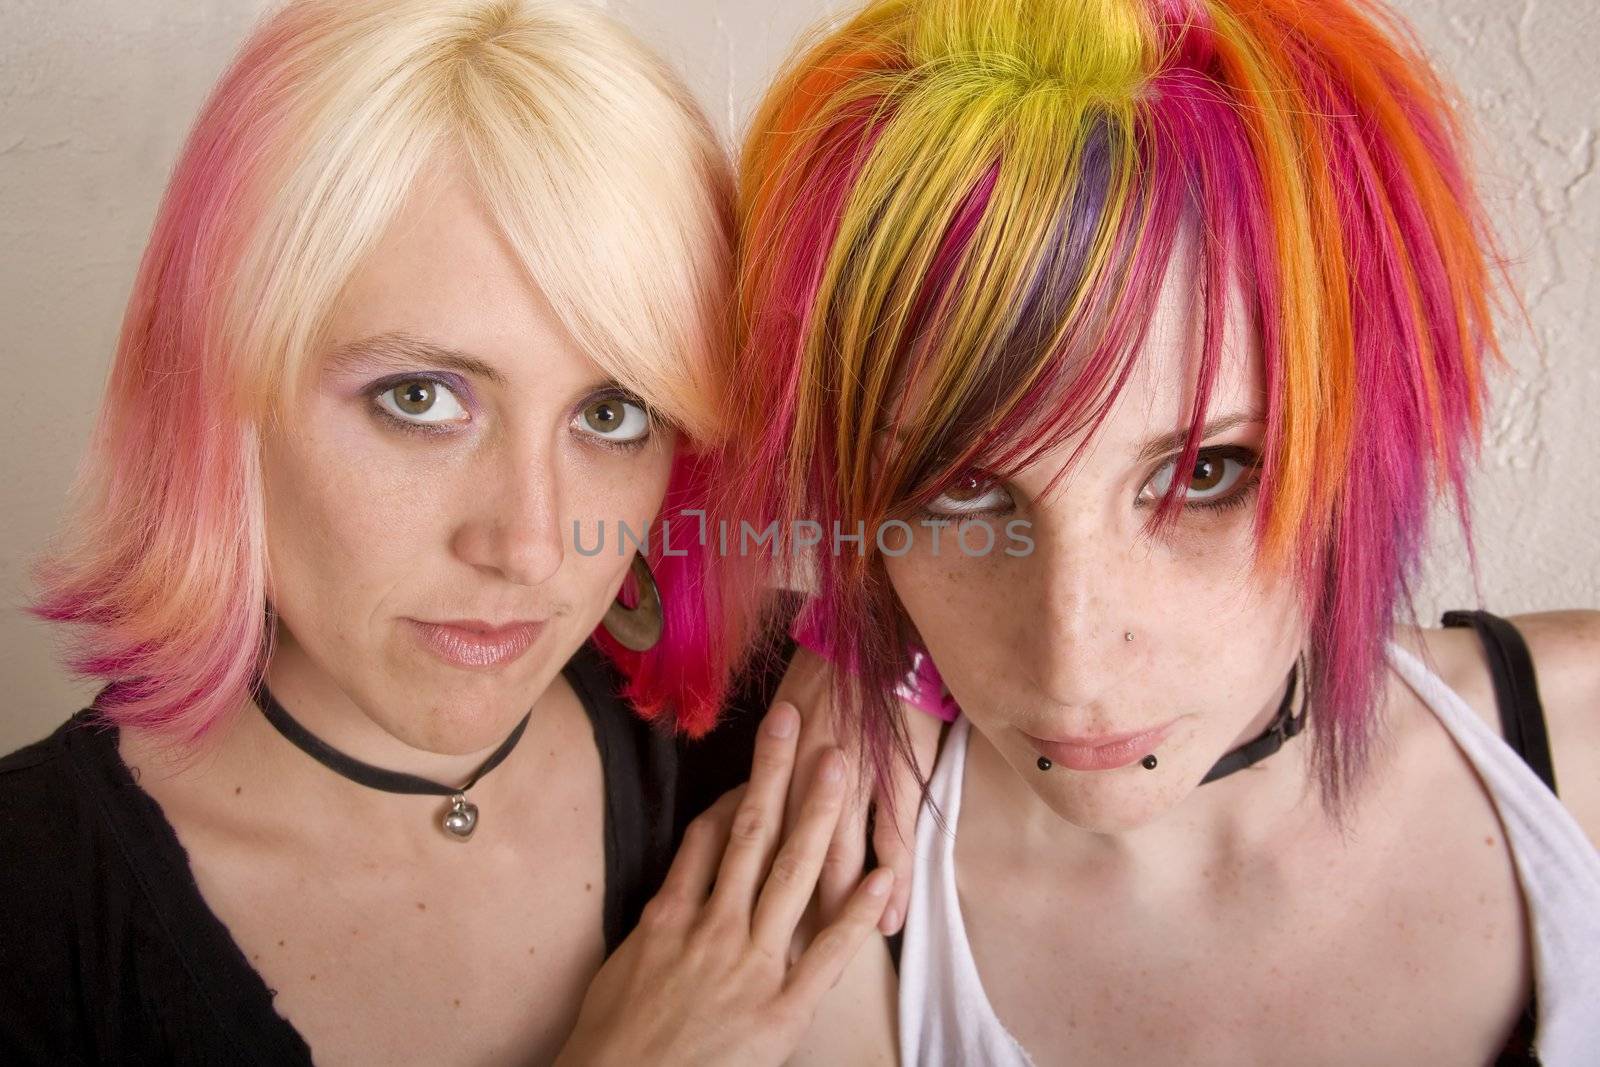 Two hip girls with brightly colored hair